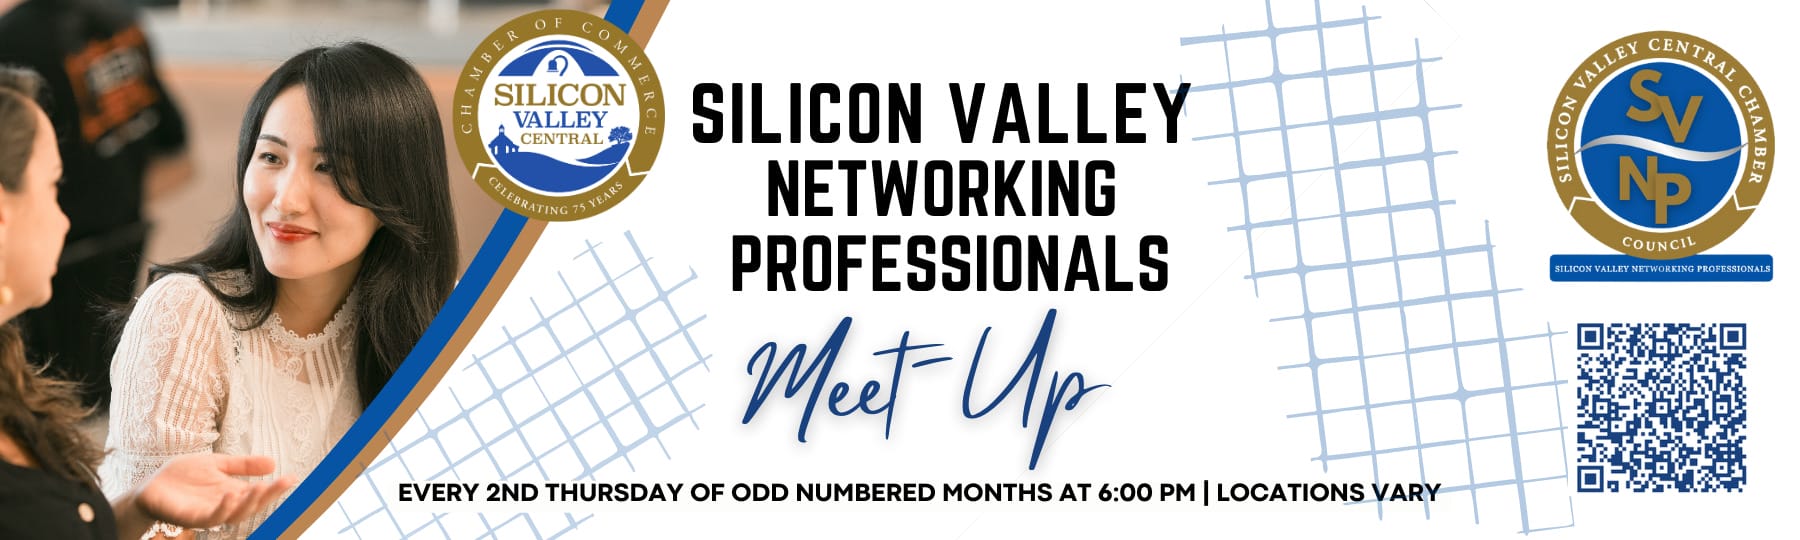 Silicon Valley Networking Professionals